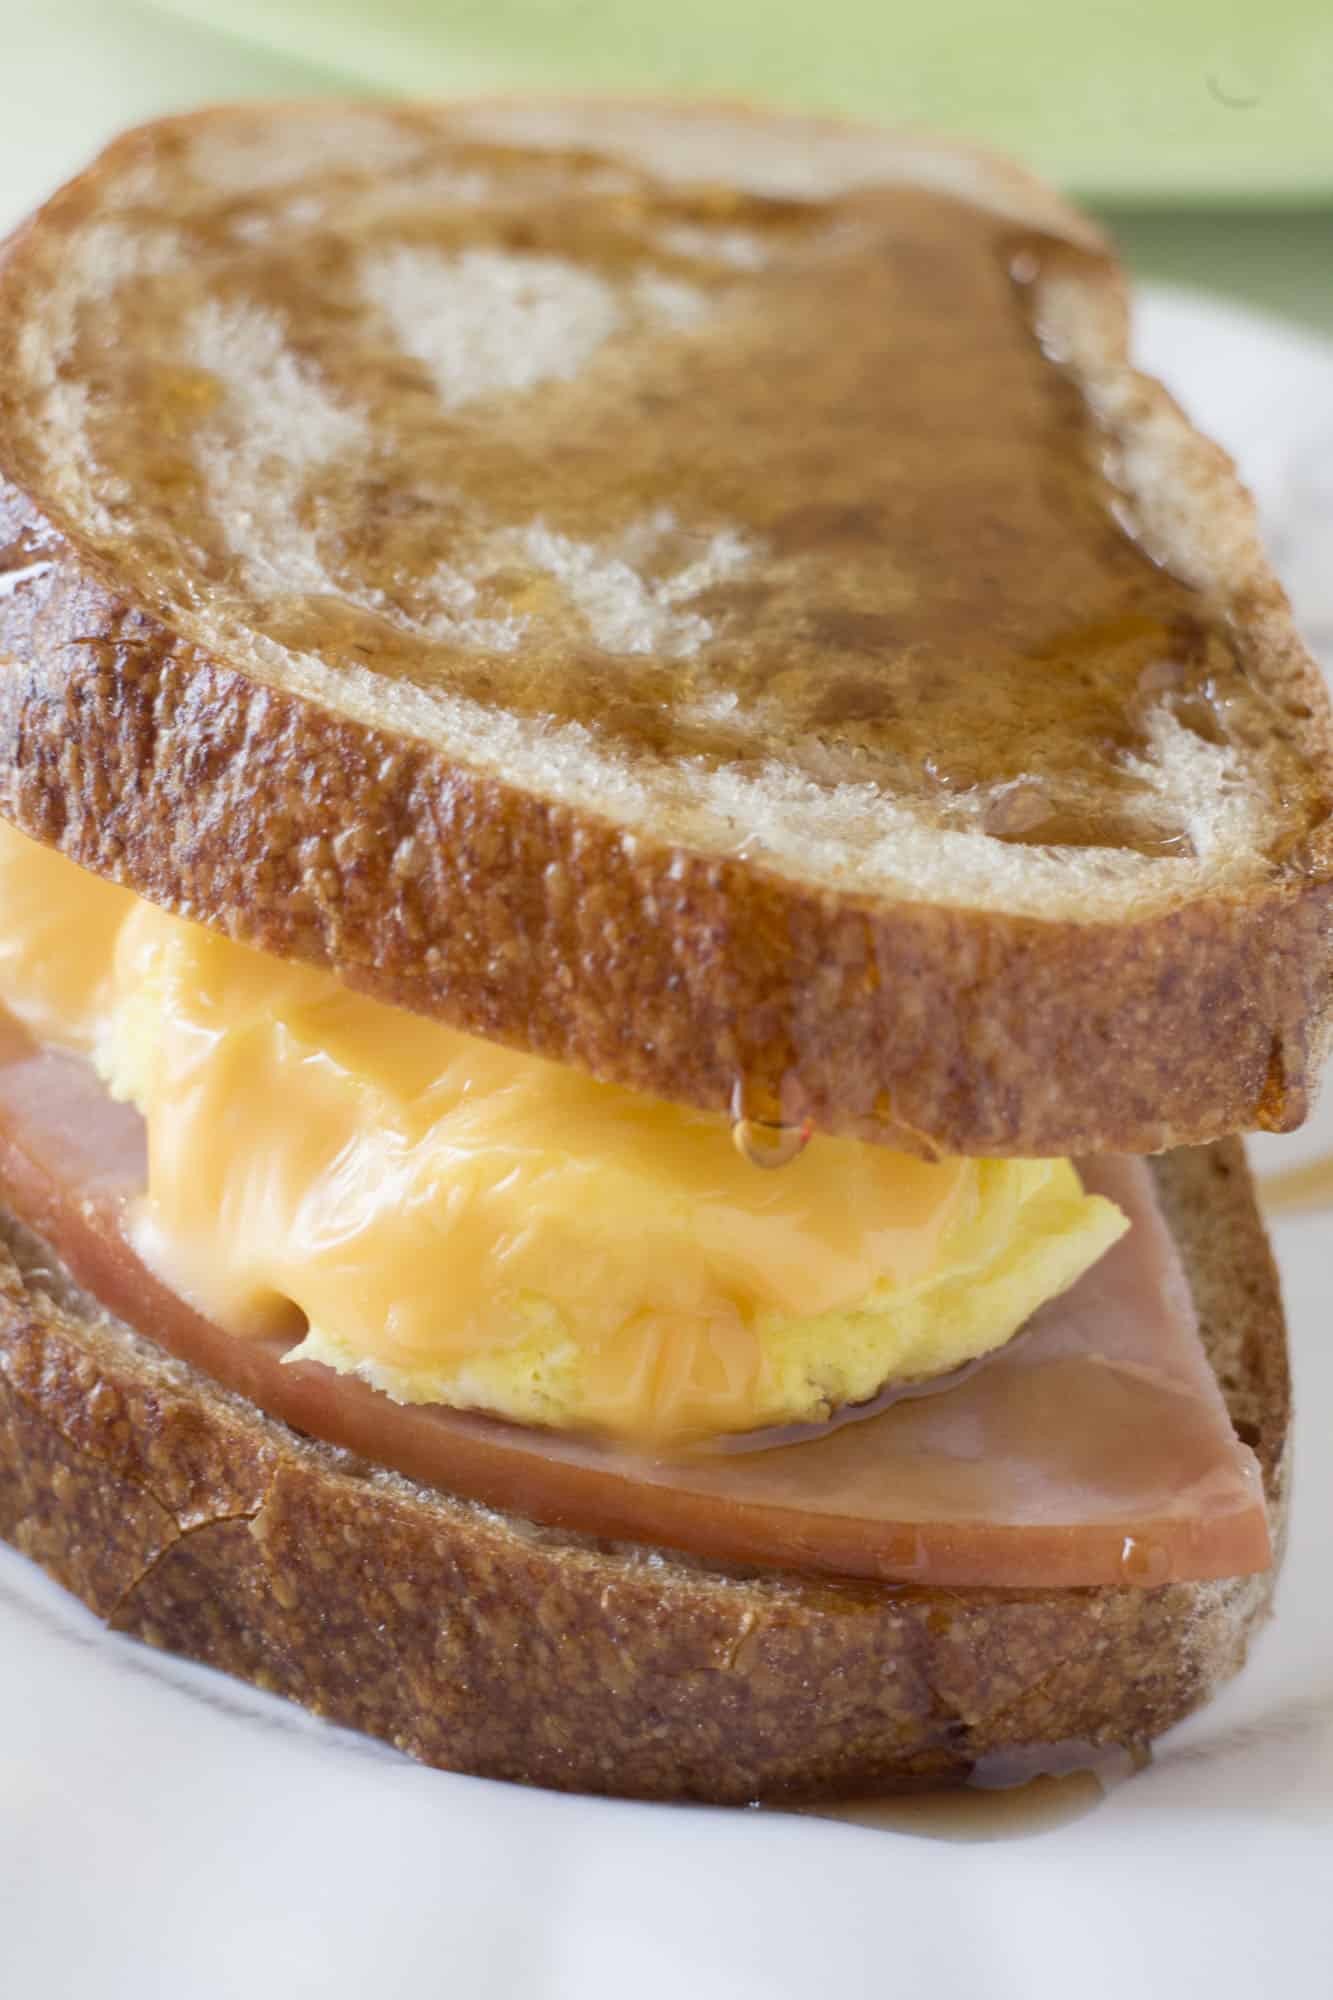 EASY, YUMMY breakfast sandwich made in 2 MINUTES! This Maple Syrup, Egg, Ham and Cheese Sandwich recipe is great for a quick breakfast! You can freeze the sandwiches to make ahead too! They taste like french toast to me!